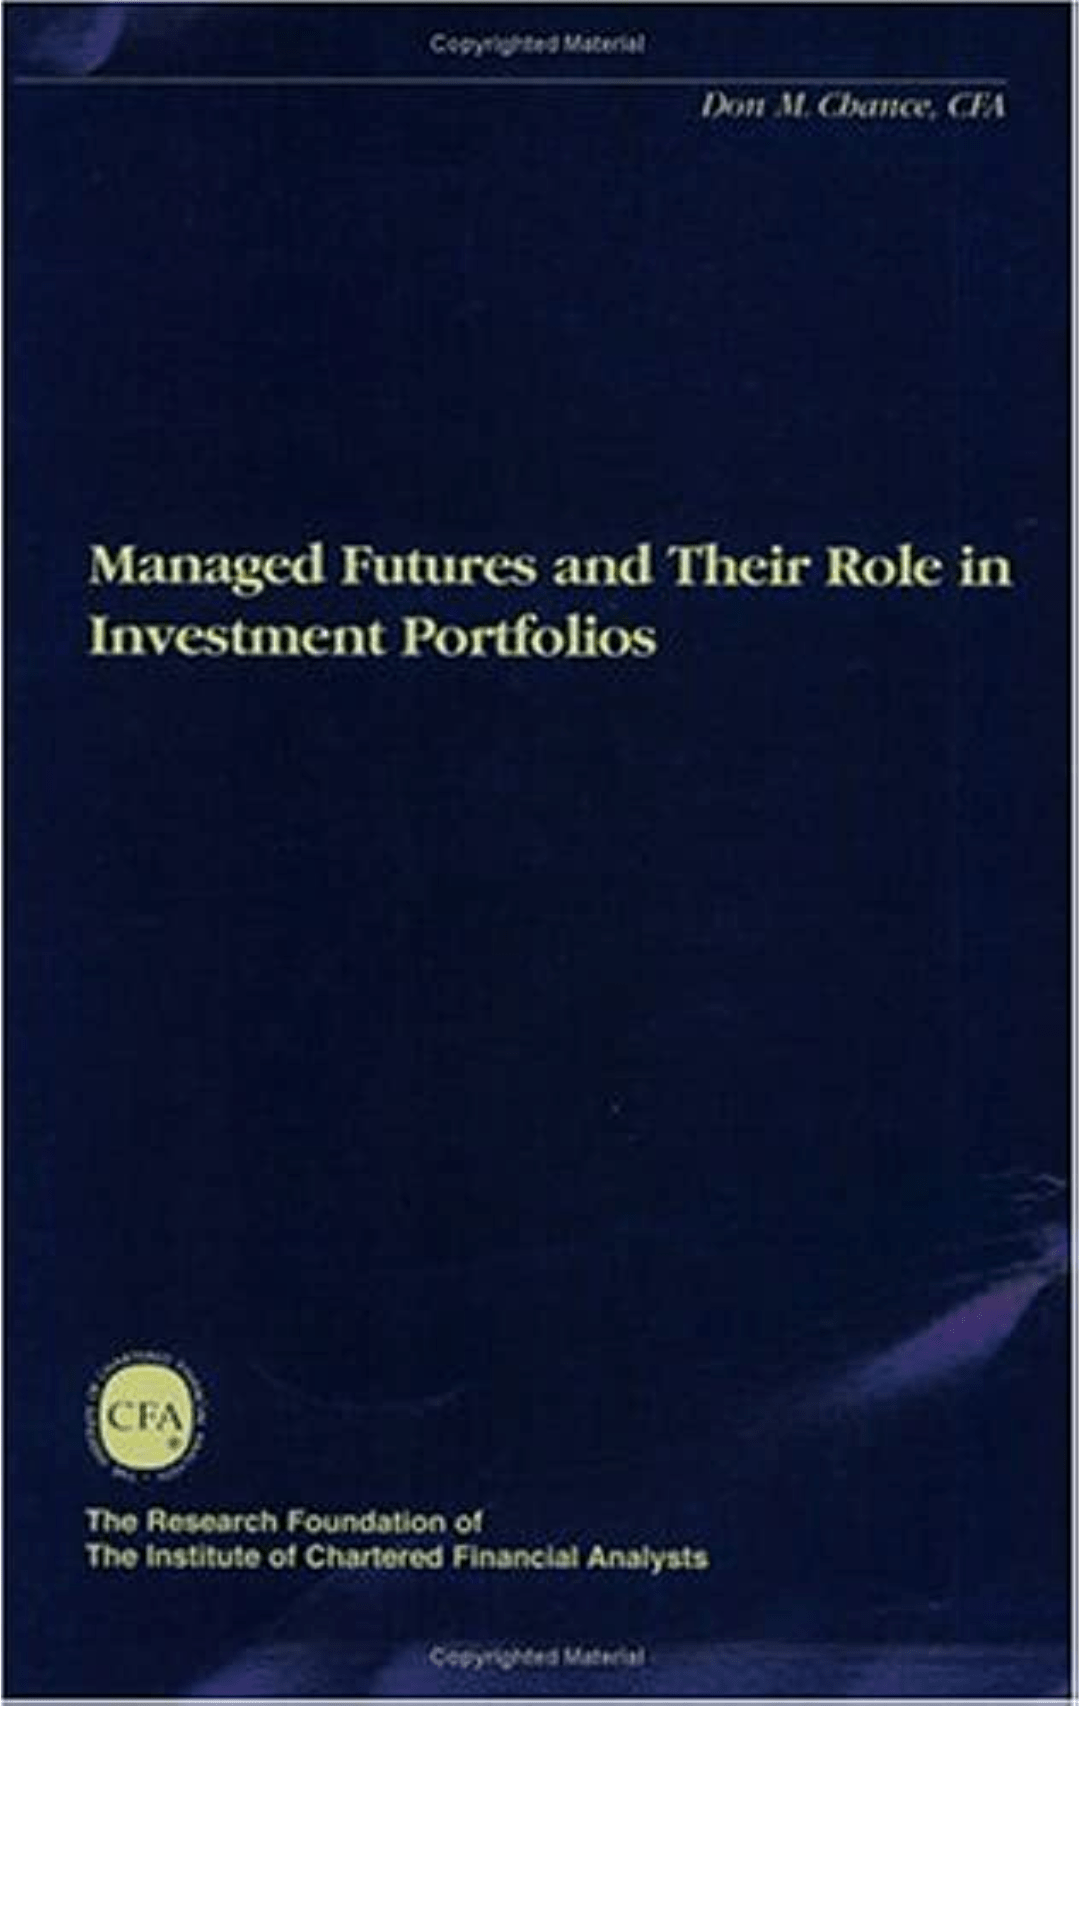 Managed Futures and Their Role in Investment Portfolios